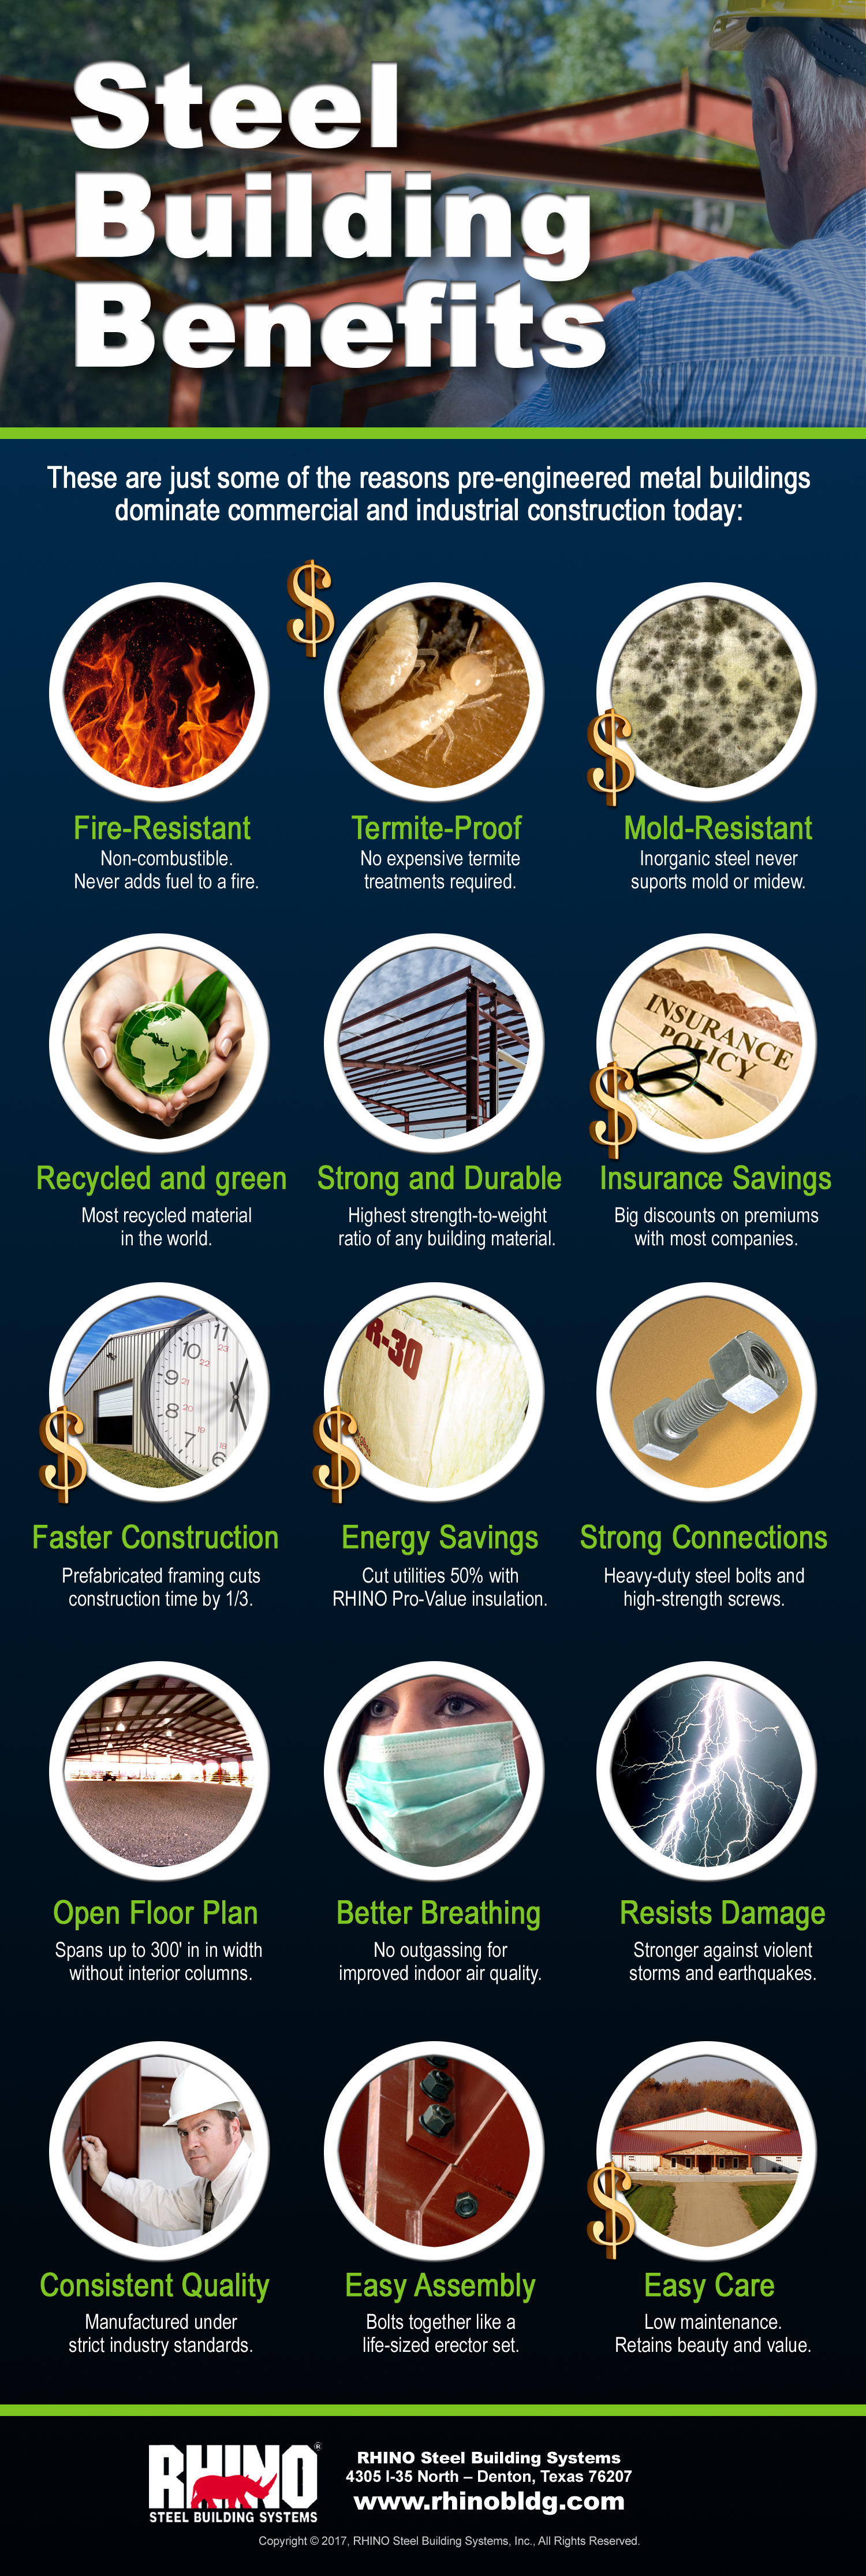 RHINO infographic shows 15 benefits of buildings of steel.